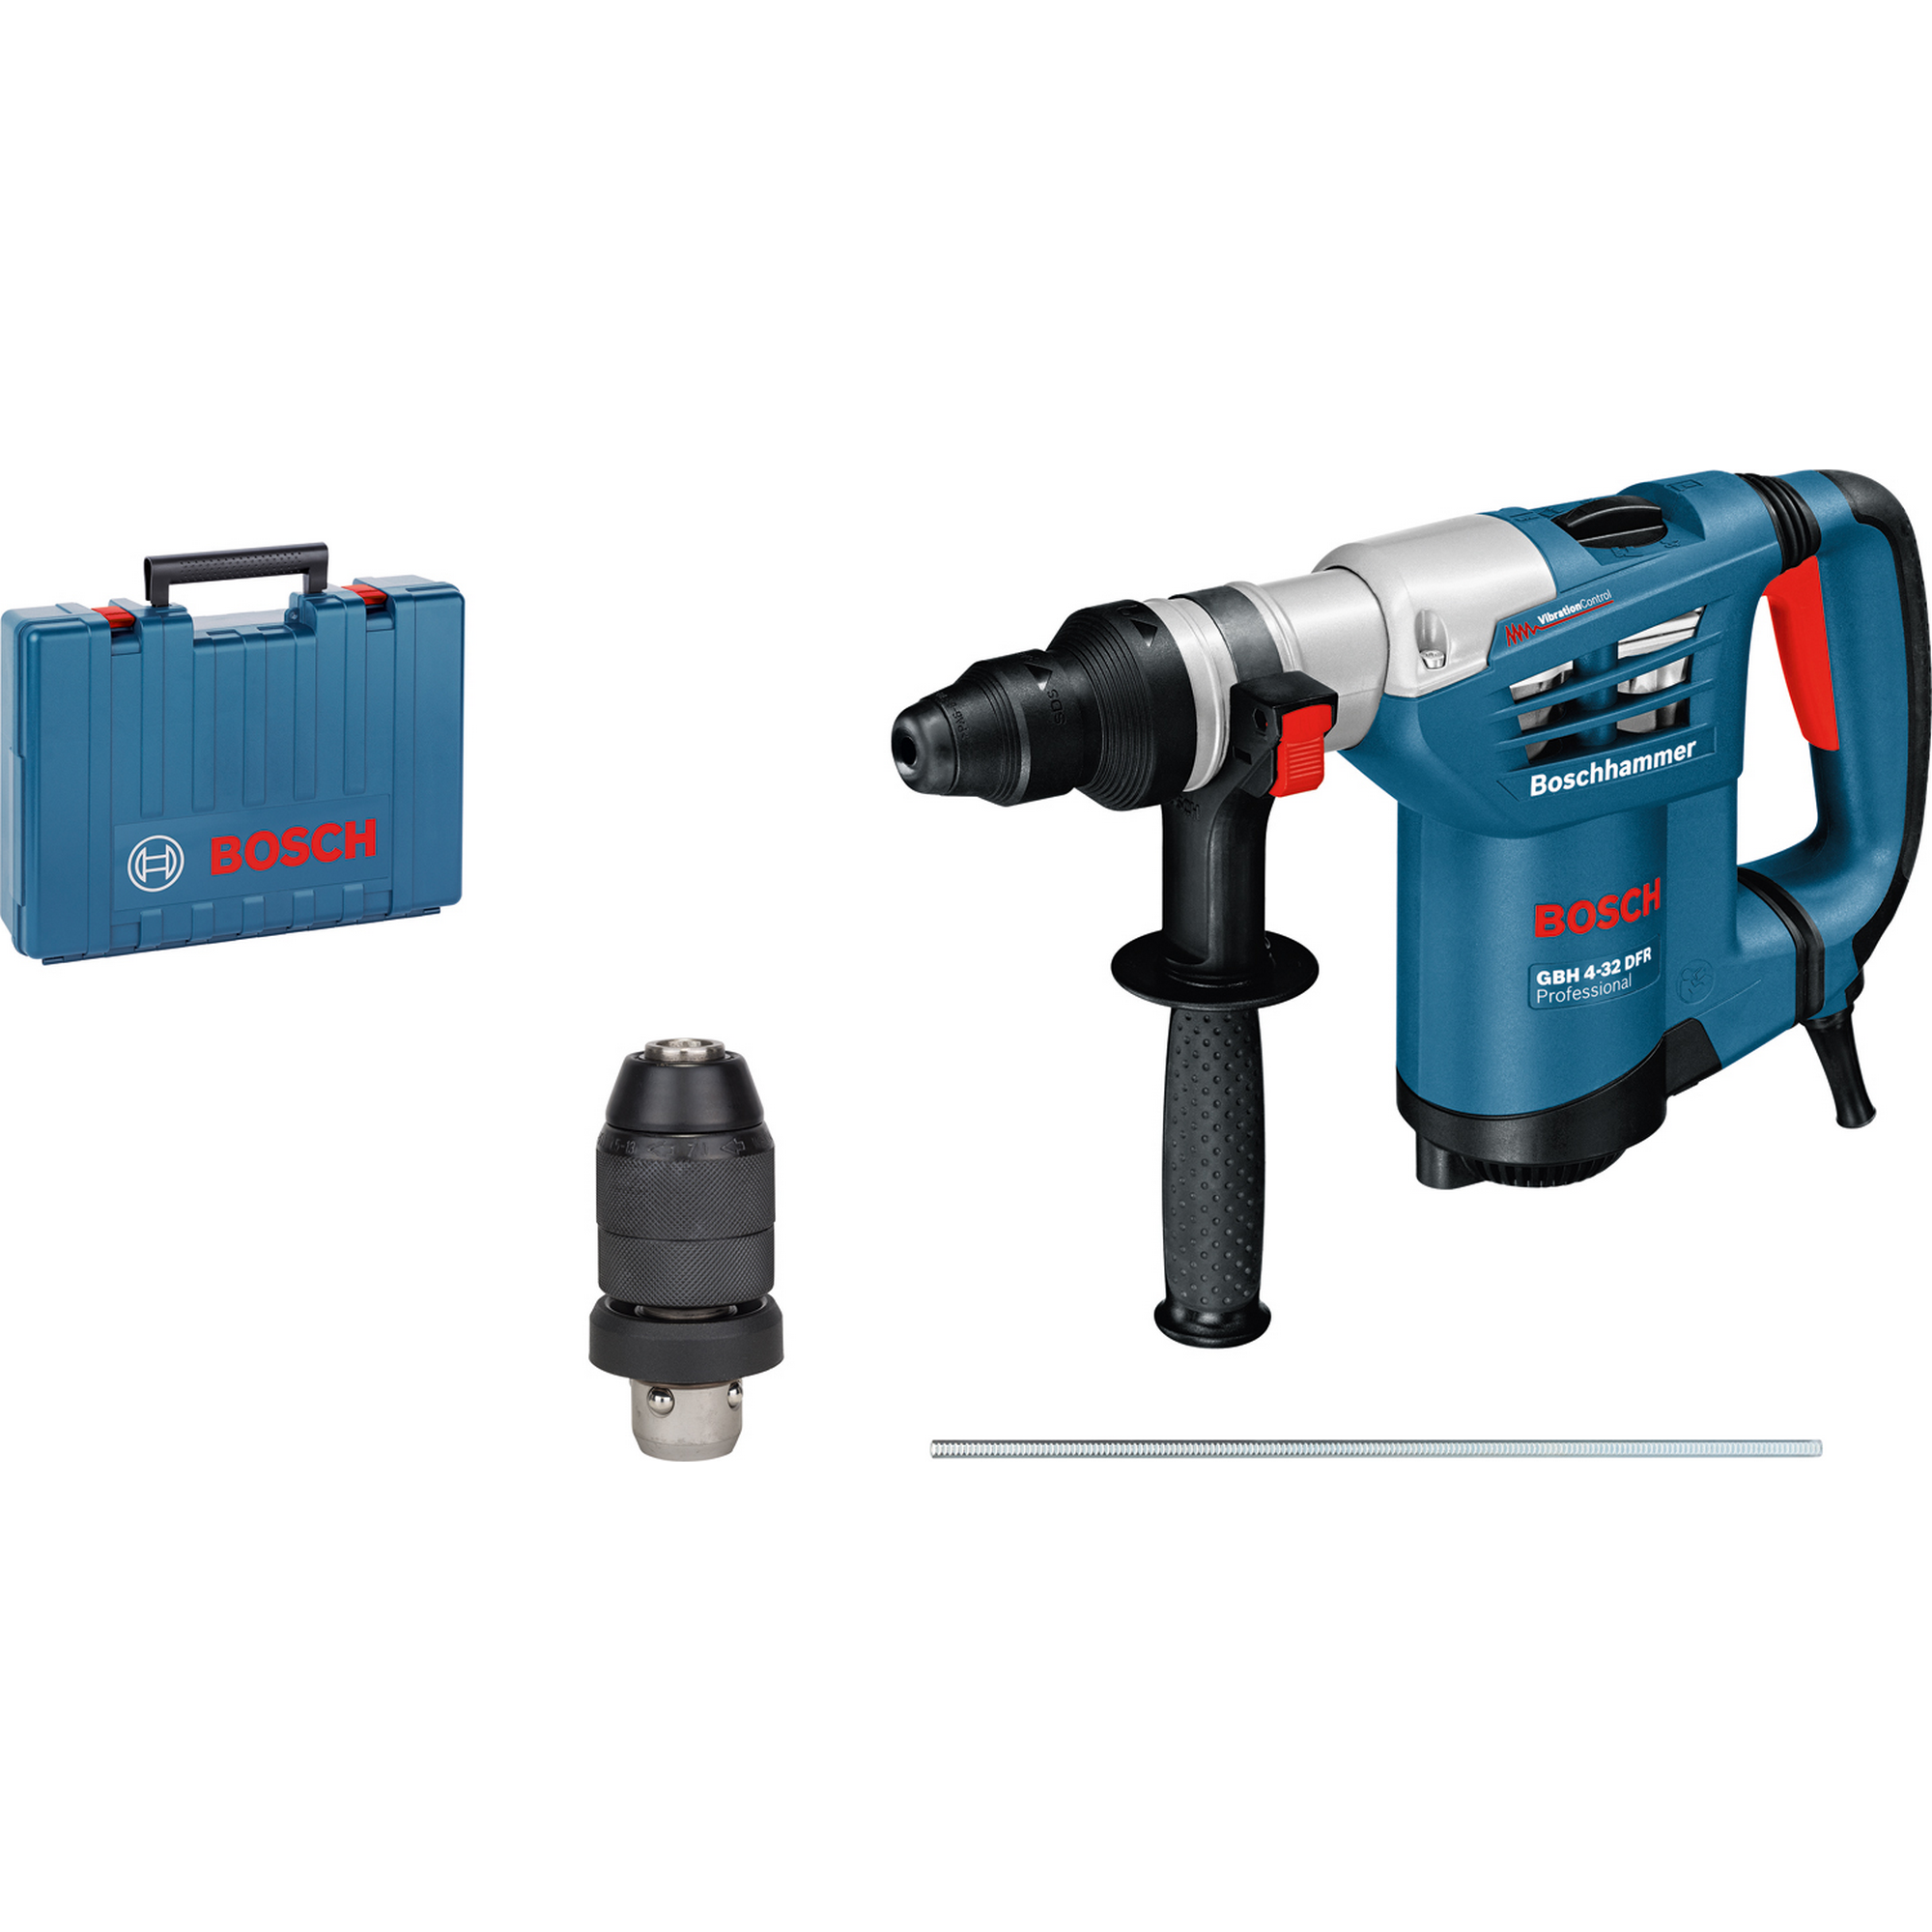 Bohrhammer 'GBH 4-32 DFR Professional' mit SDS plus in Koffer + product picture